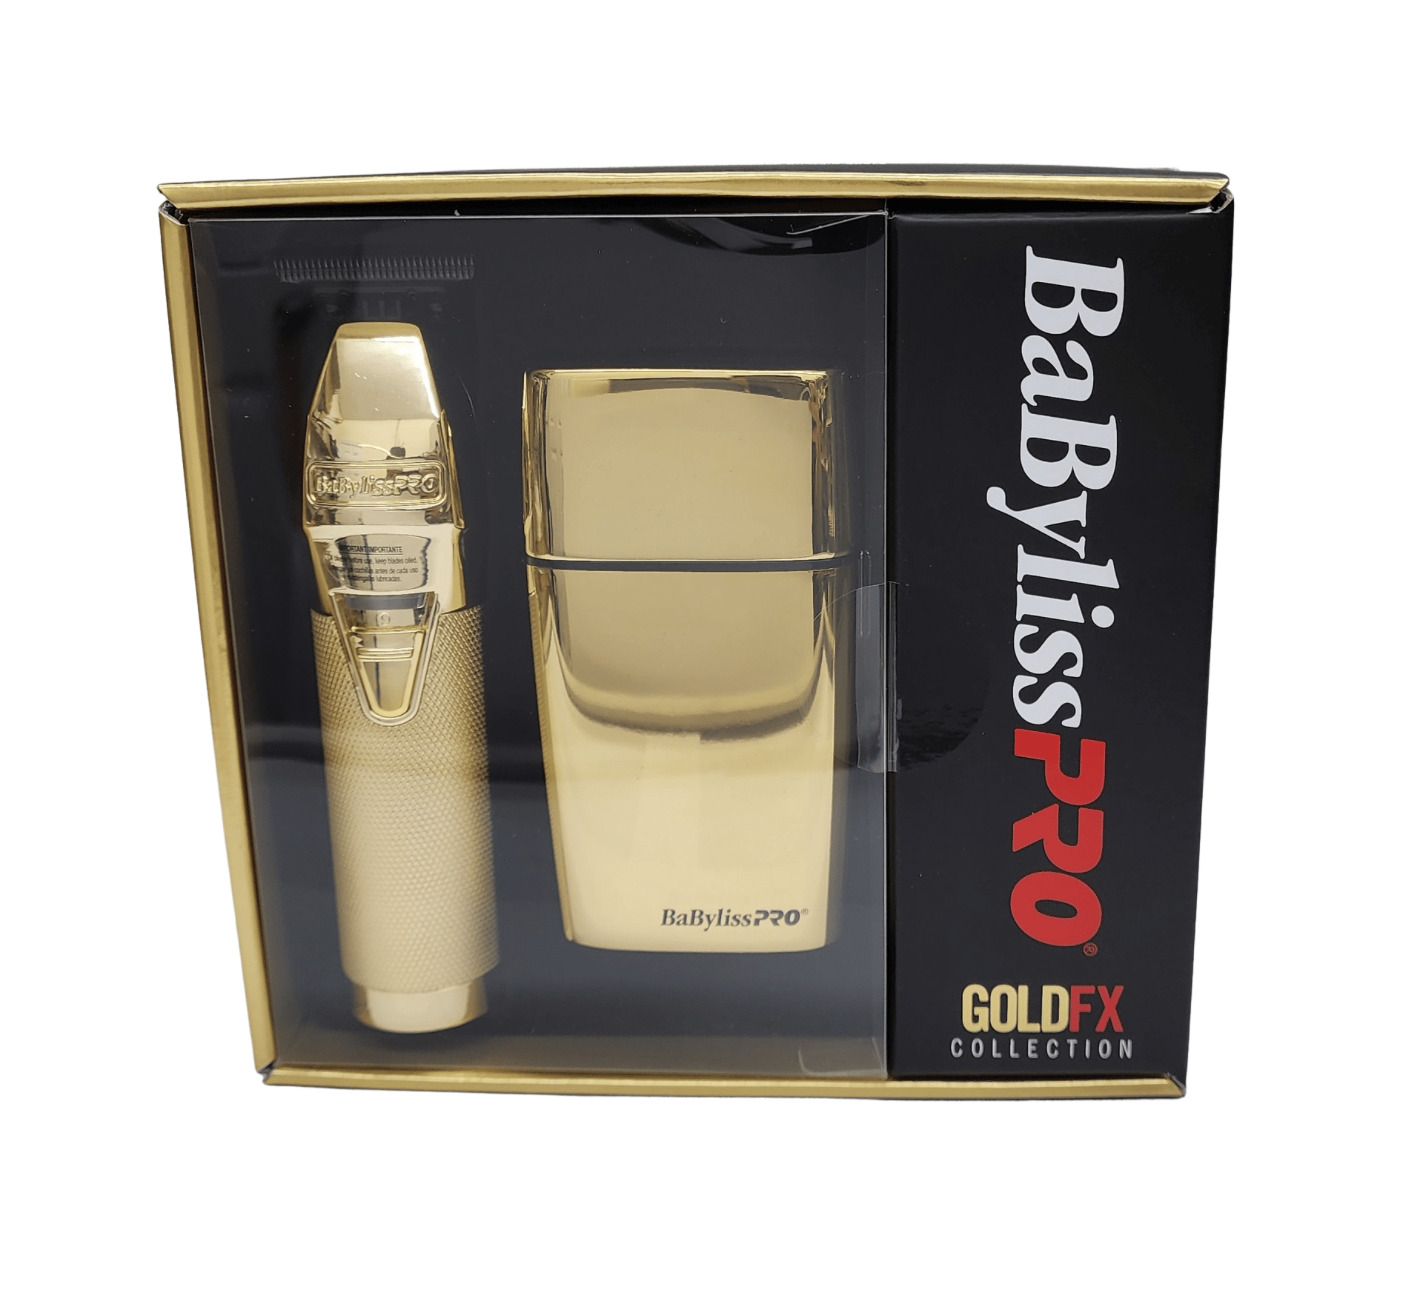 BaBylissPRO GoldFx Collection combo FXHOLPK2GN - The Classic Holiday Combo With Black DLC Blade on the Trimmer and Black Foil on the Shaver